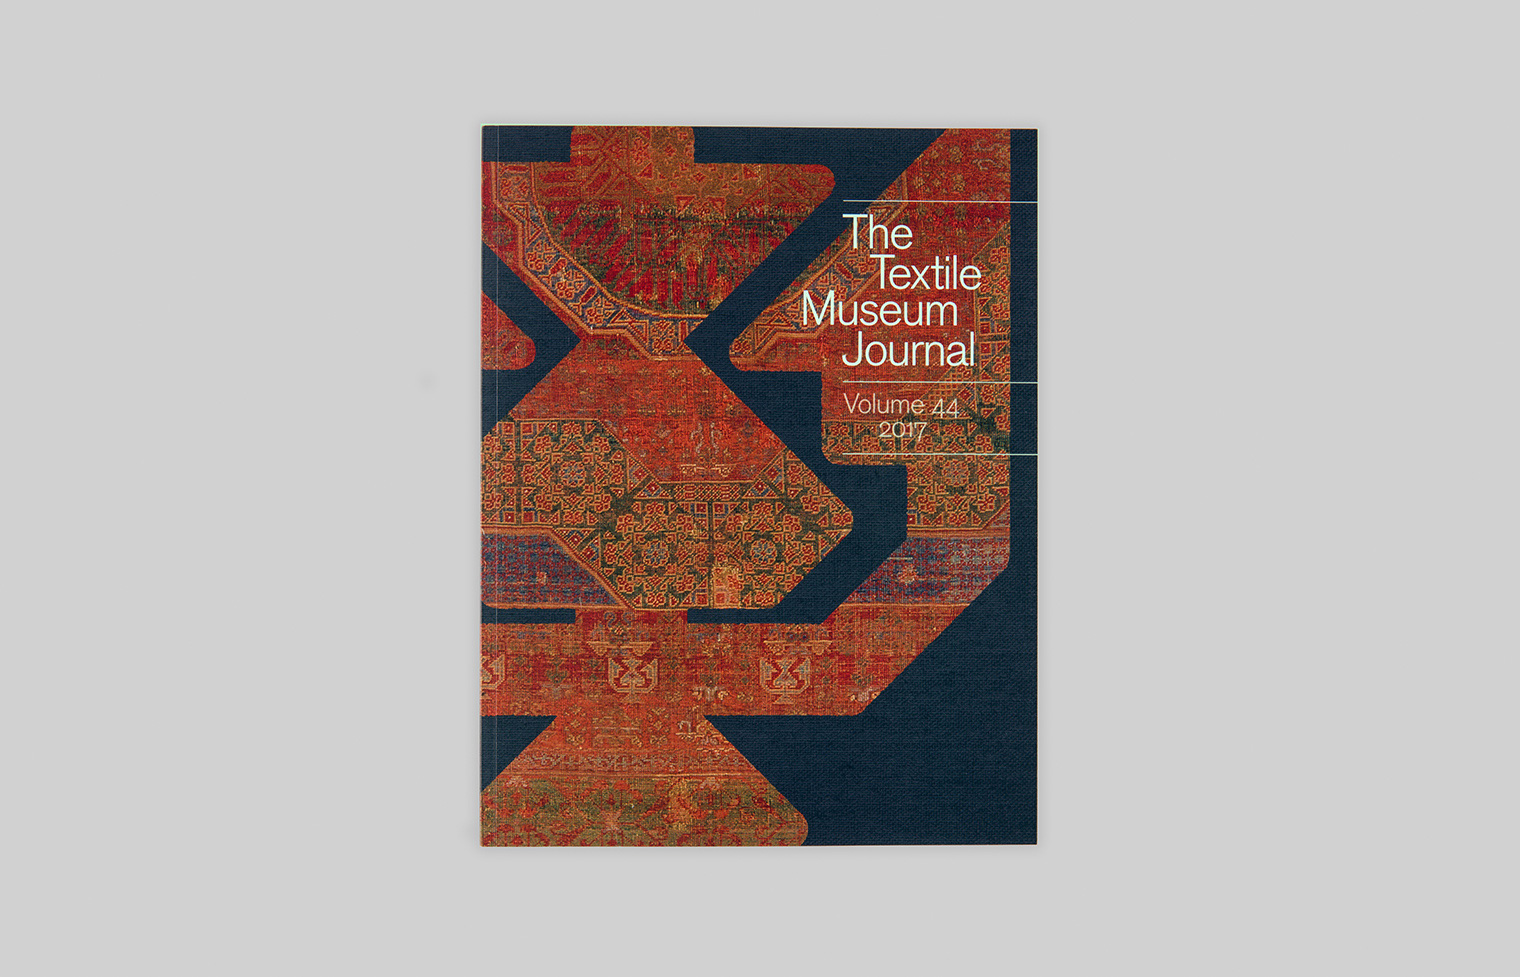 Front cover features a detail from a patterned Mamluk carpet from Cairo, Egypt.